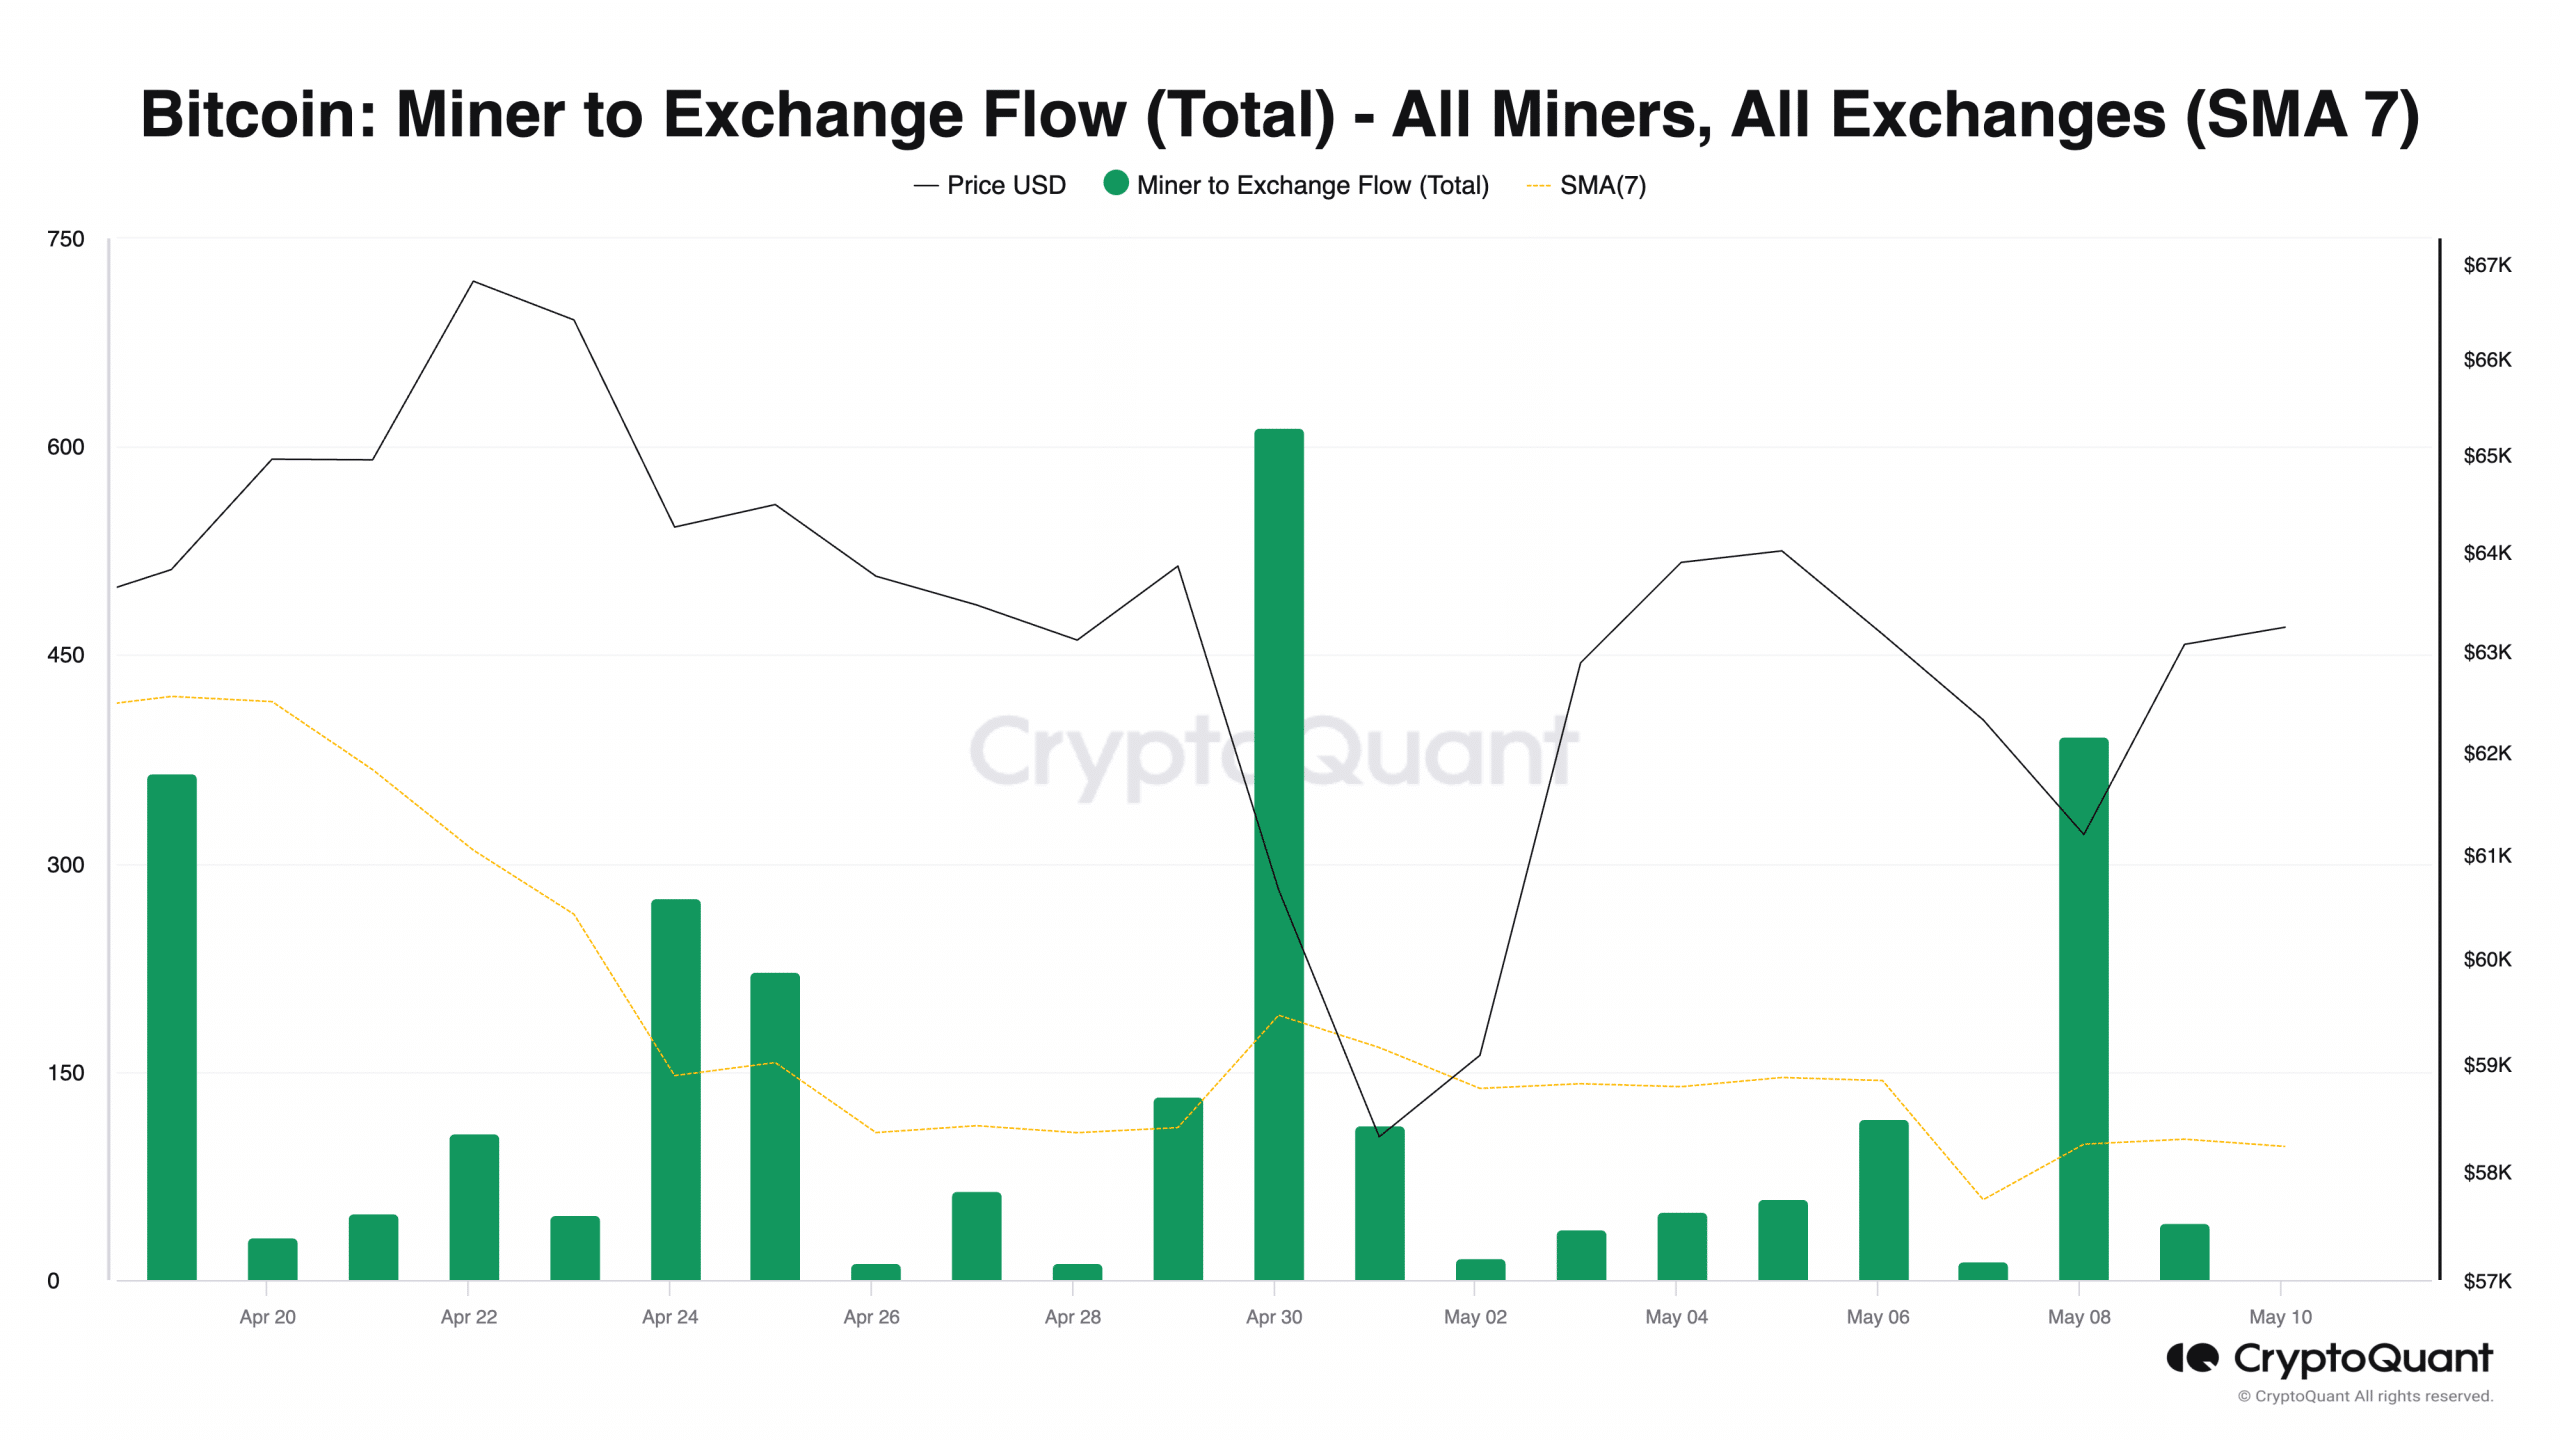 Bitcoin Miner to Exchange Flow (Total) - All Miners, All Exchanges (SMA 7)